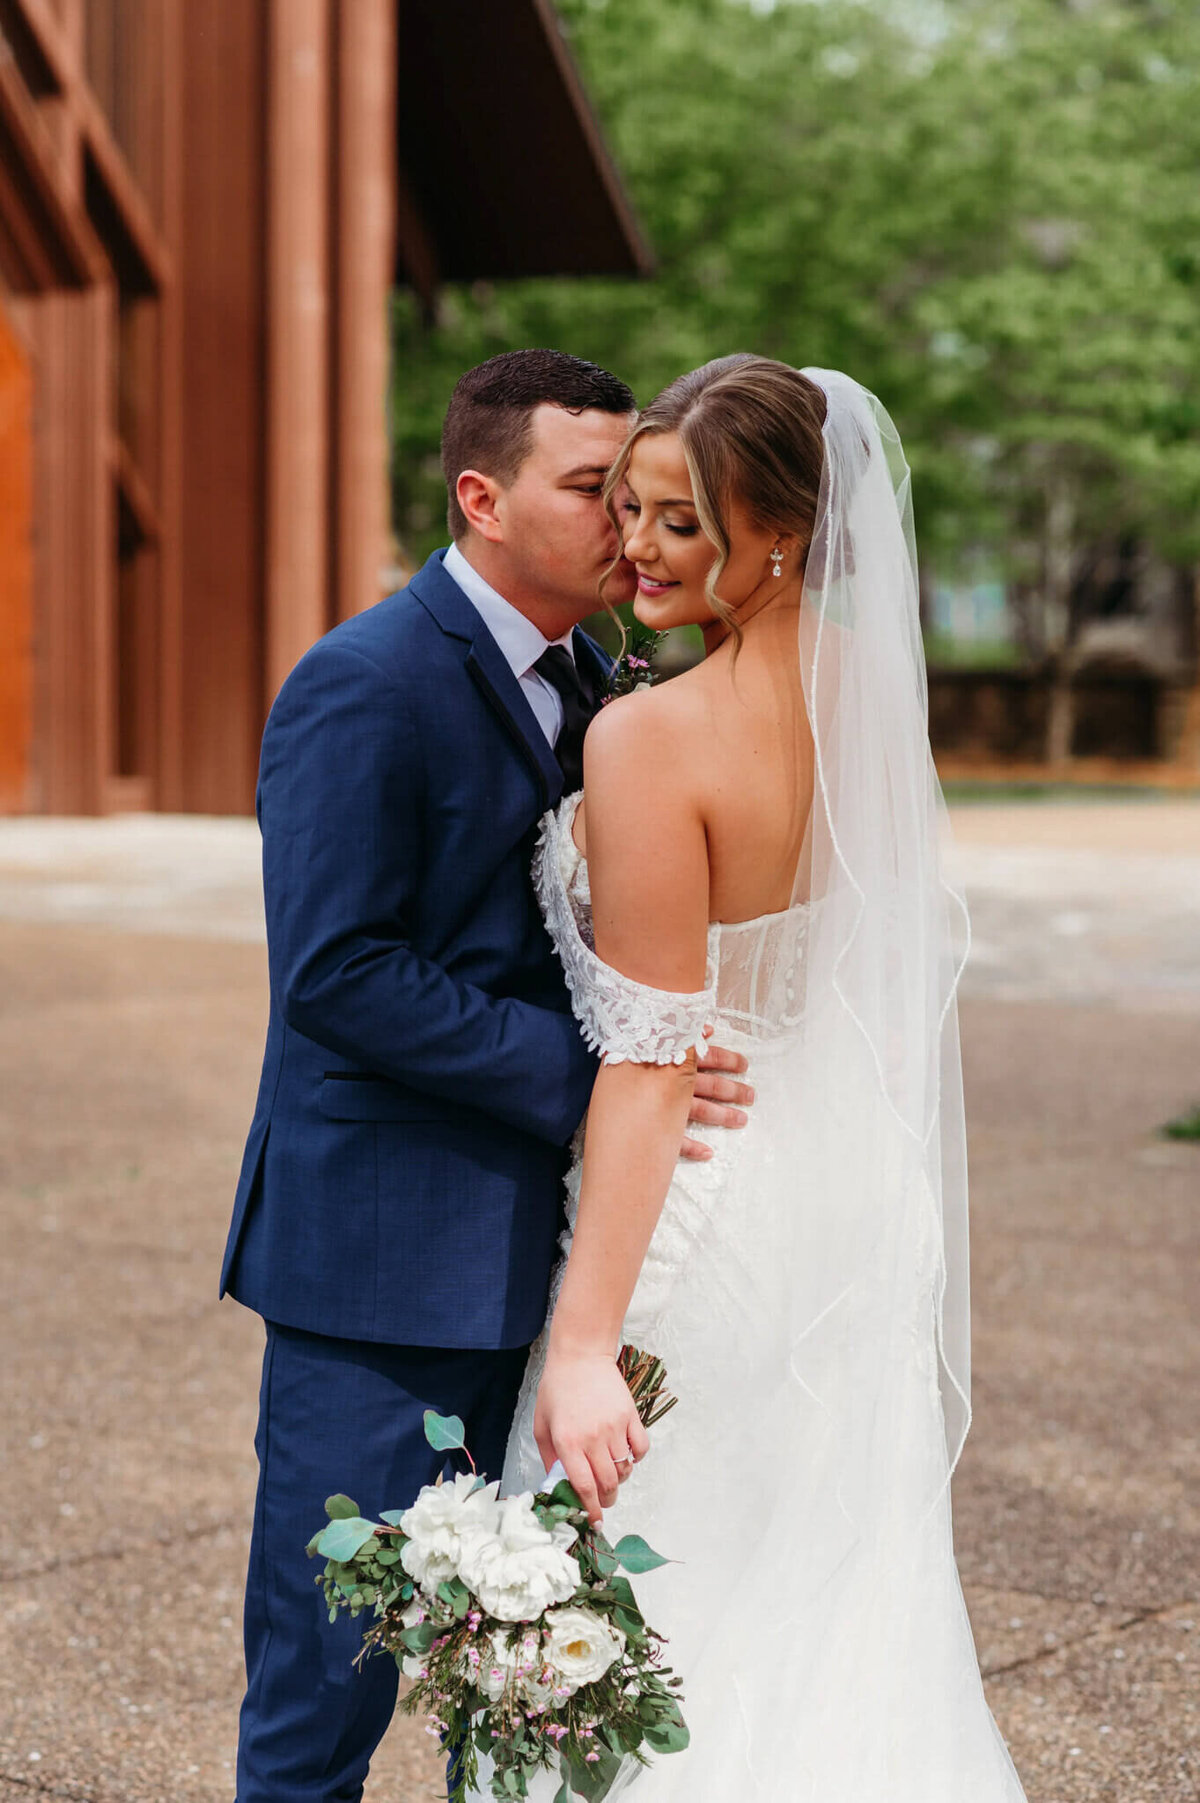 Photo of a groom kissing his bride cheek while she looks at the ground and smiles